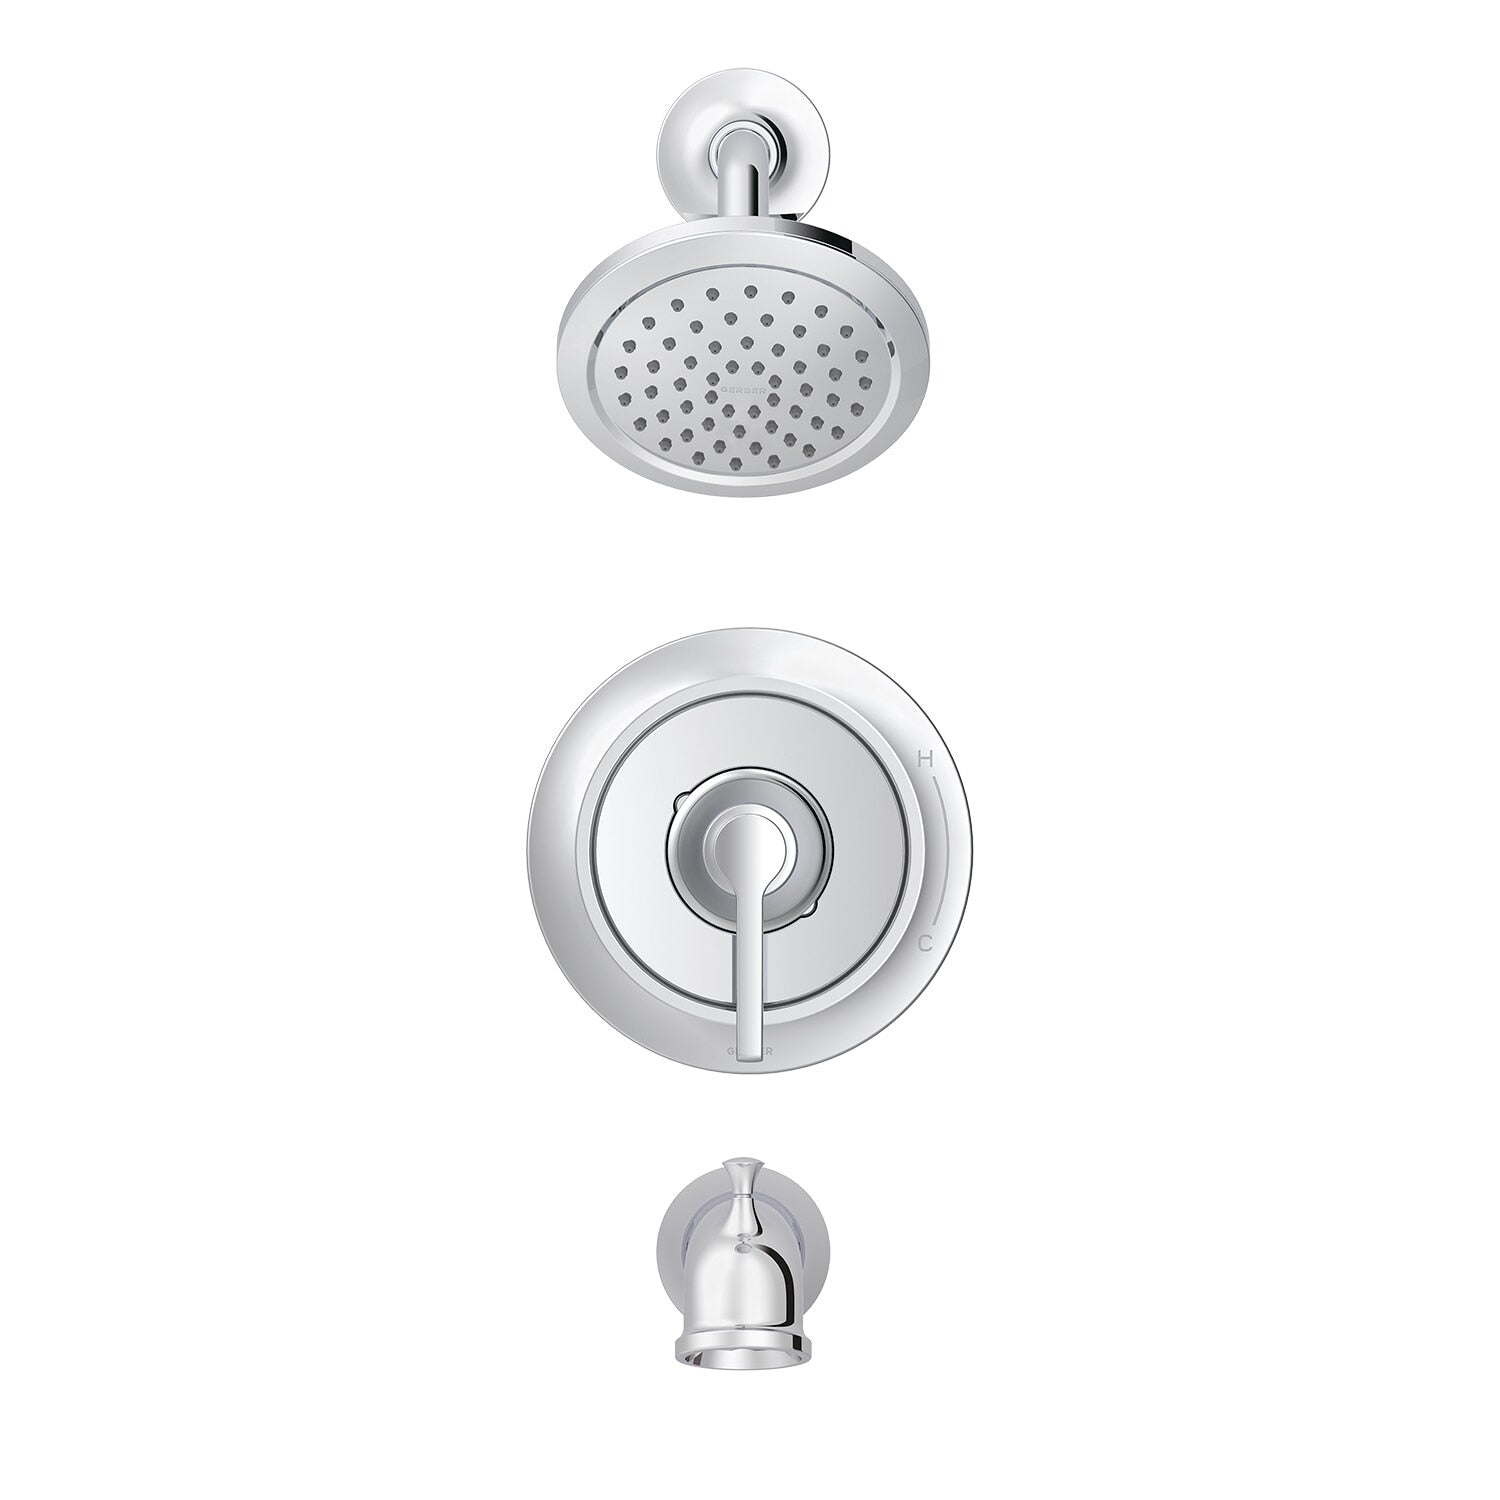 Danze by Gerber Northerly 1H Tub and Shower Trim Kit and Treysta Cartridge 1.75gpm